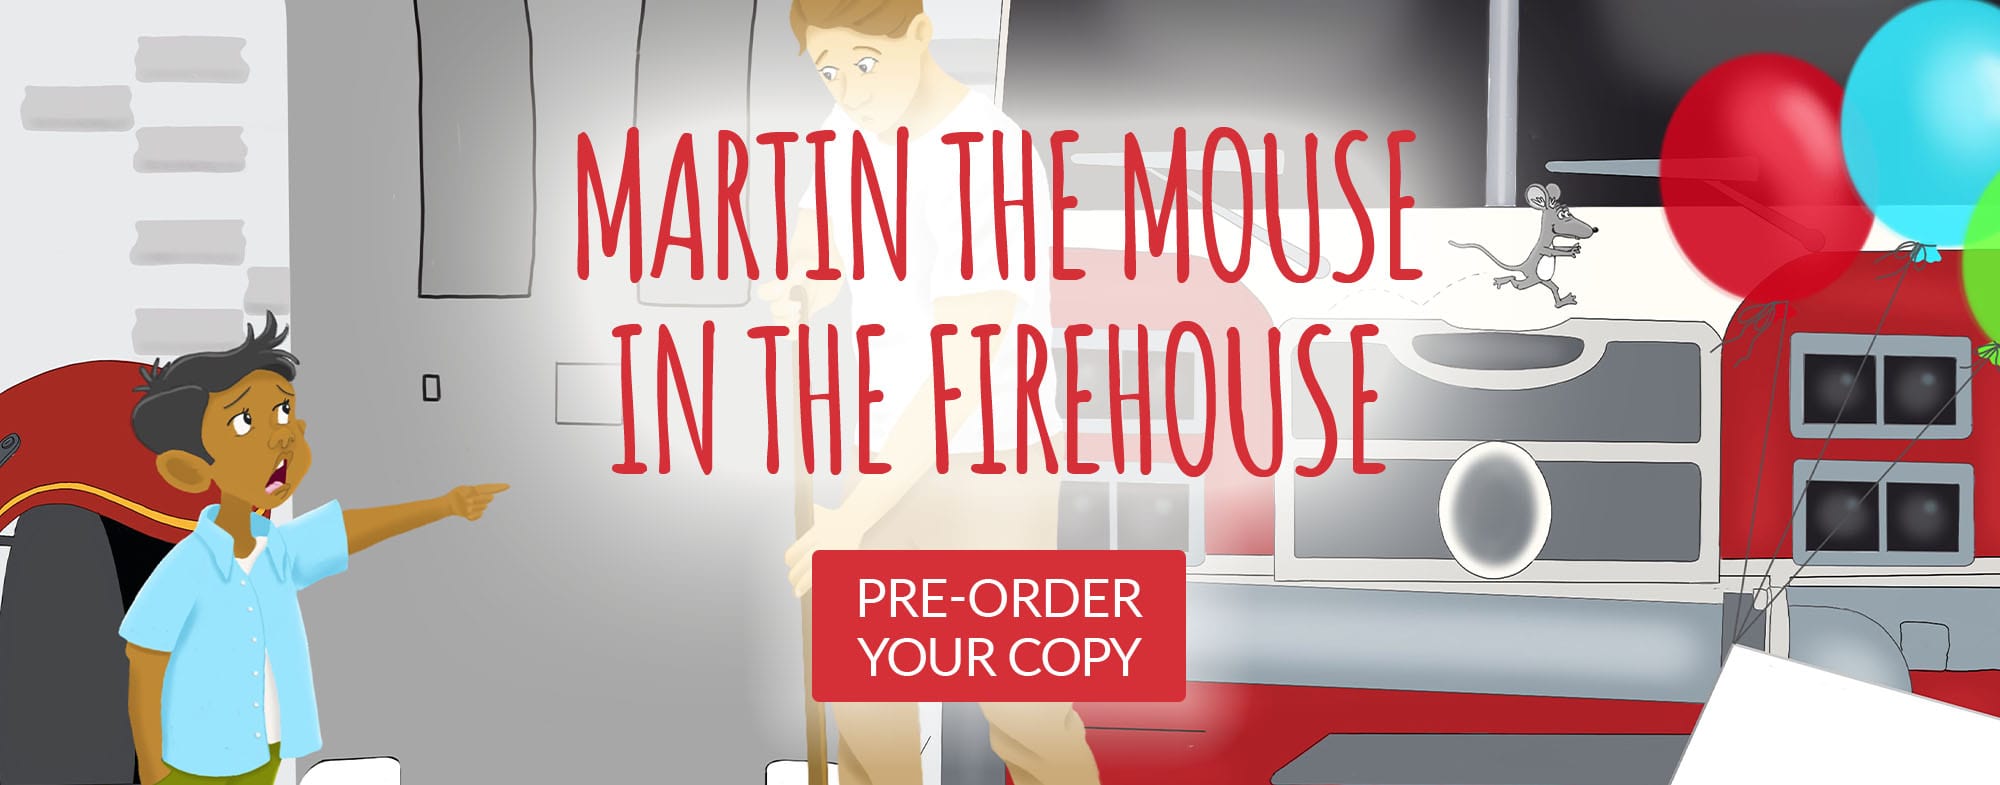 Martin the Mouse in the Firehouse Children's Books for Toddlers and Kids, with Firefighters, Firetrucks, and a mouse on a funny adventure